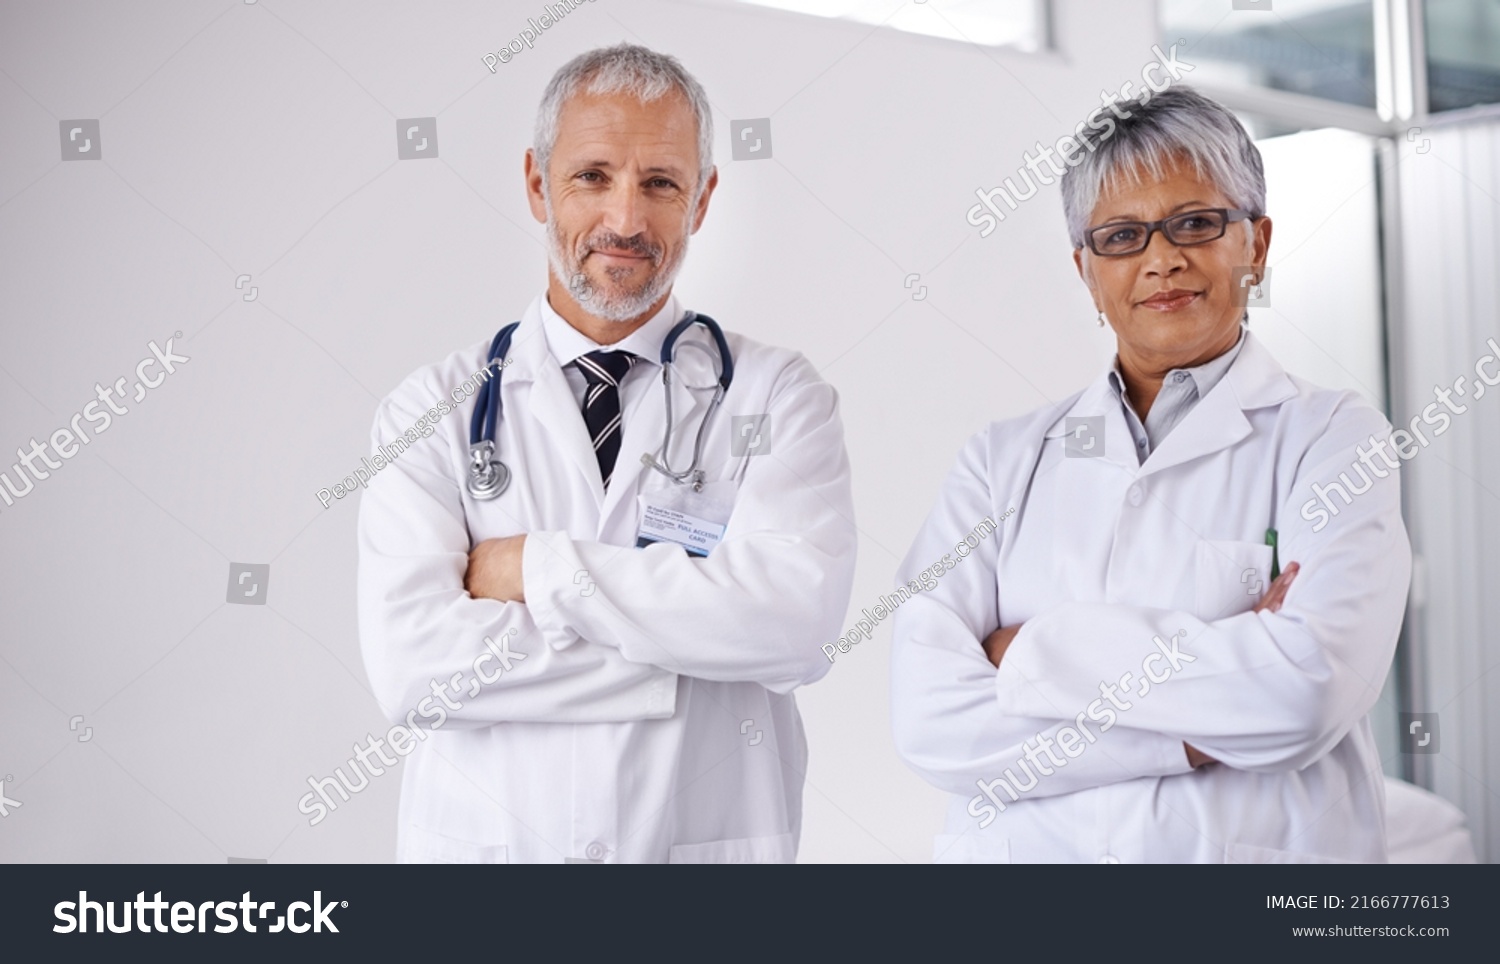 Consulting a colleague for a second opinion. Shot of two doctors working together in a hospital. #2166777613